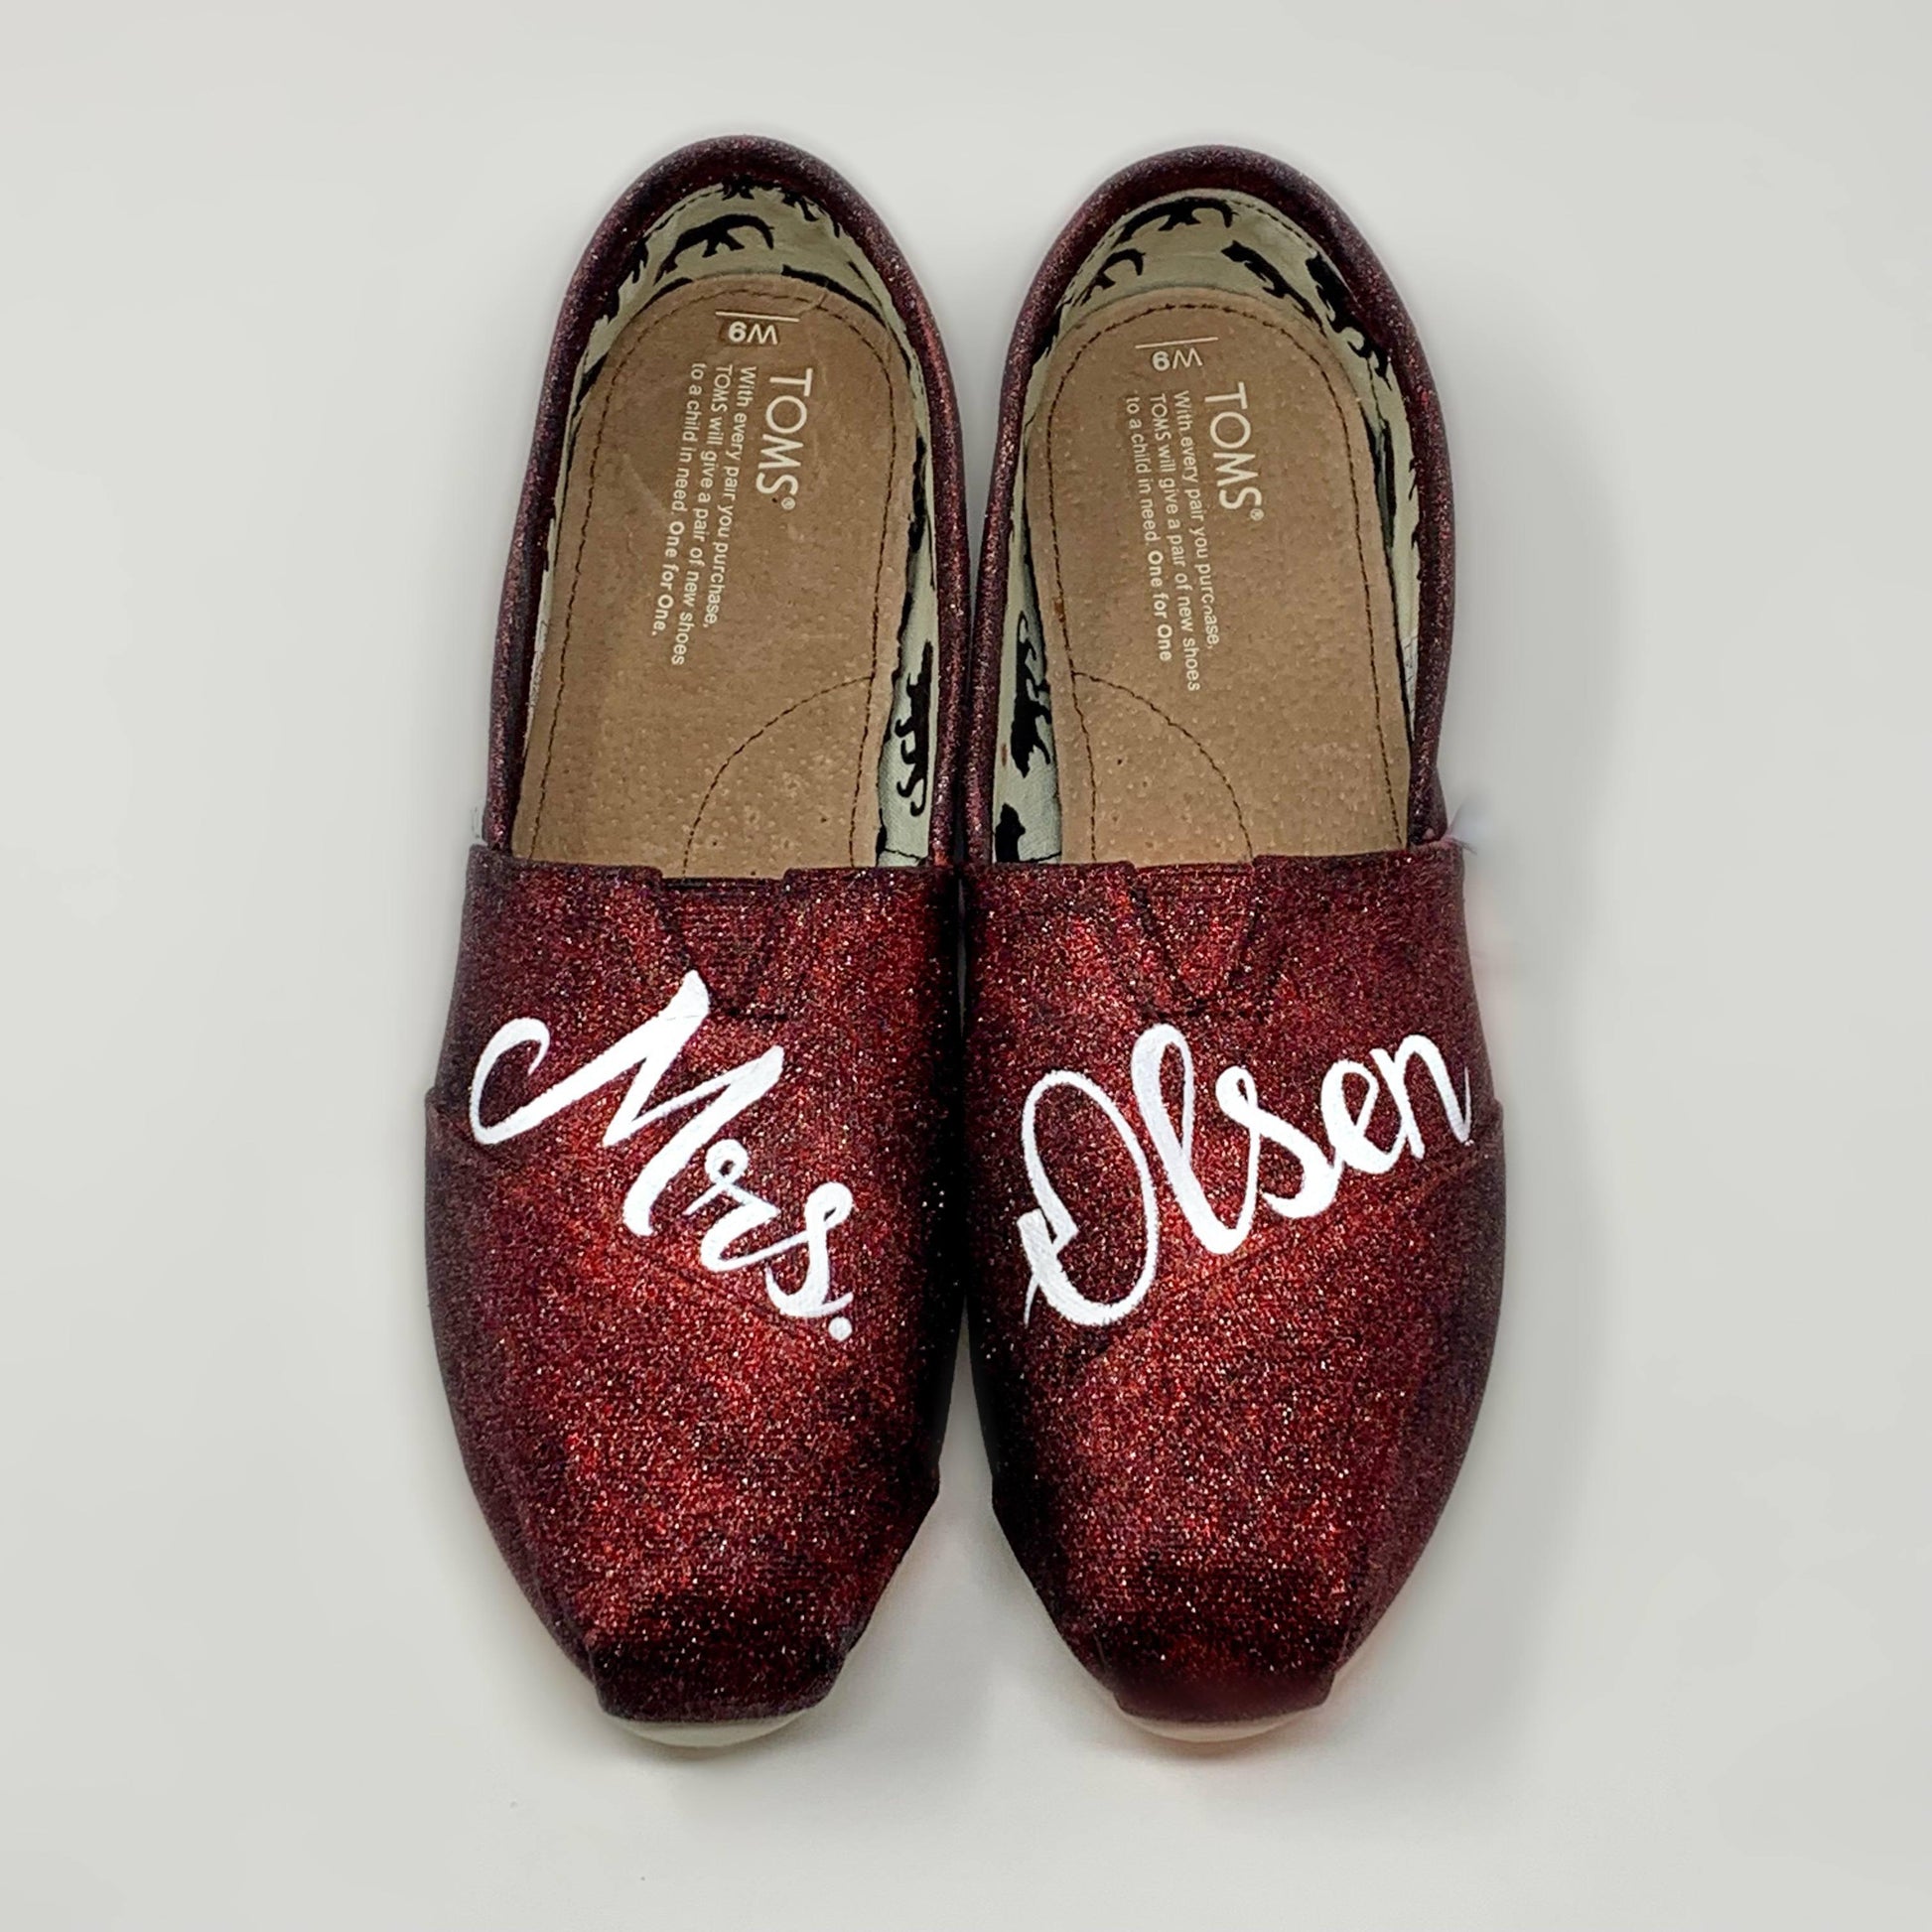 Mrs. Wine Wedding Shoes-Shoes-ButterMakesMeHappy